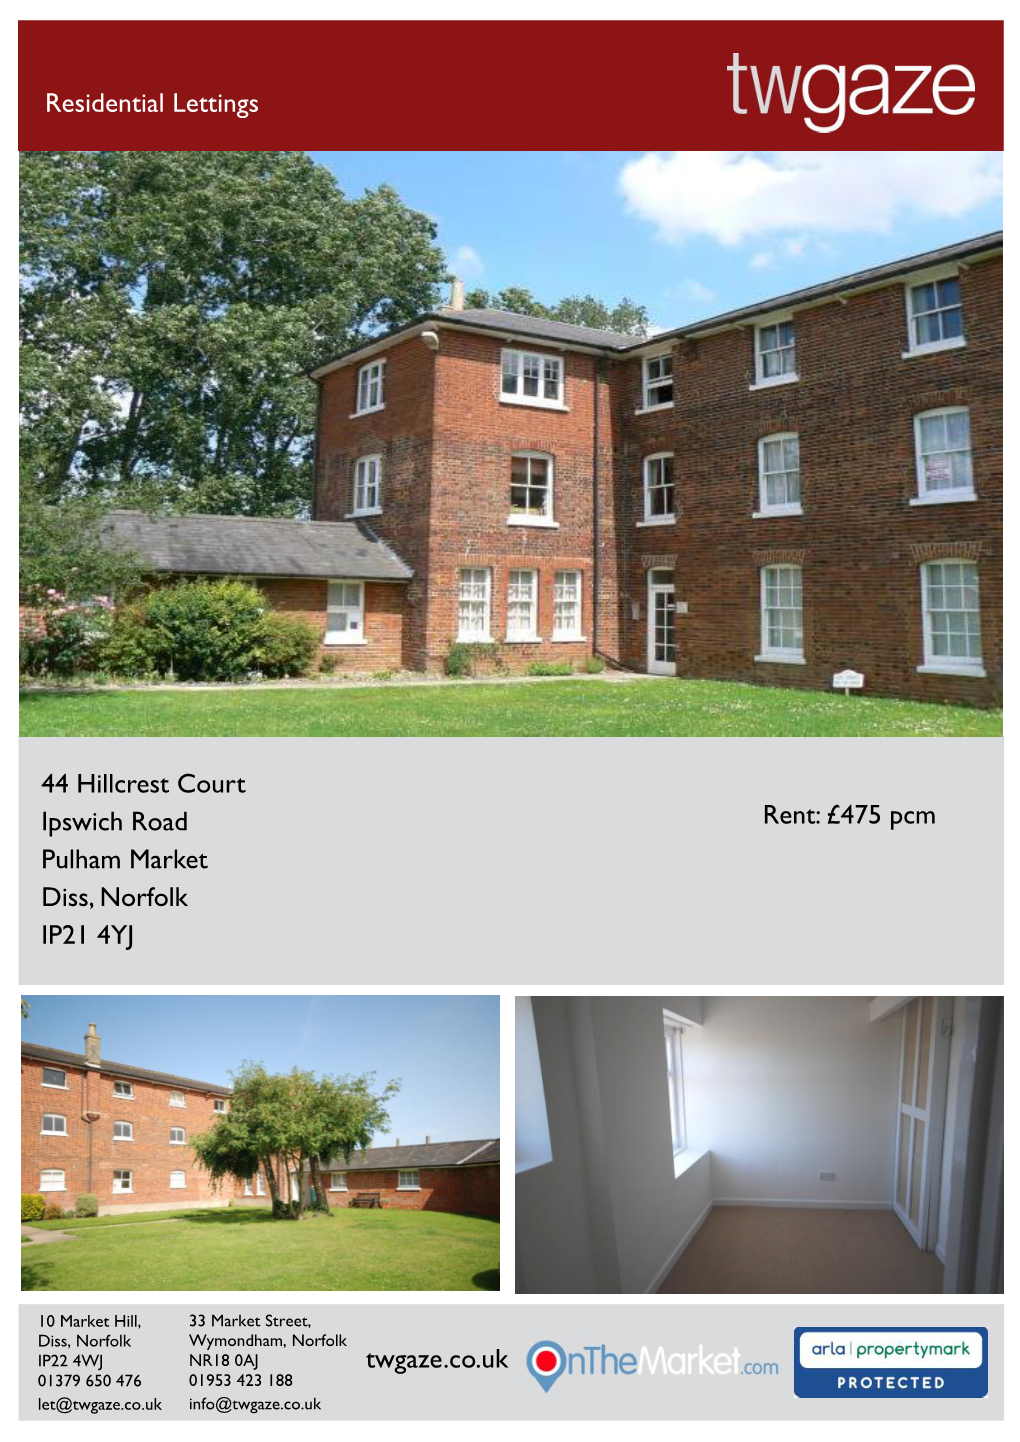 Residential Lettings 44 Hillcrest Court Ipswich Road Pulham Market Diss, Norfolk IP21 4YJ Rent